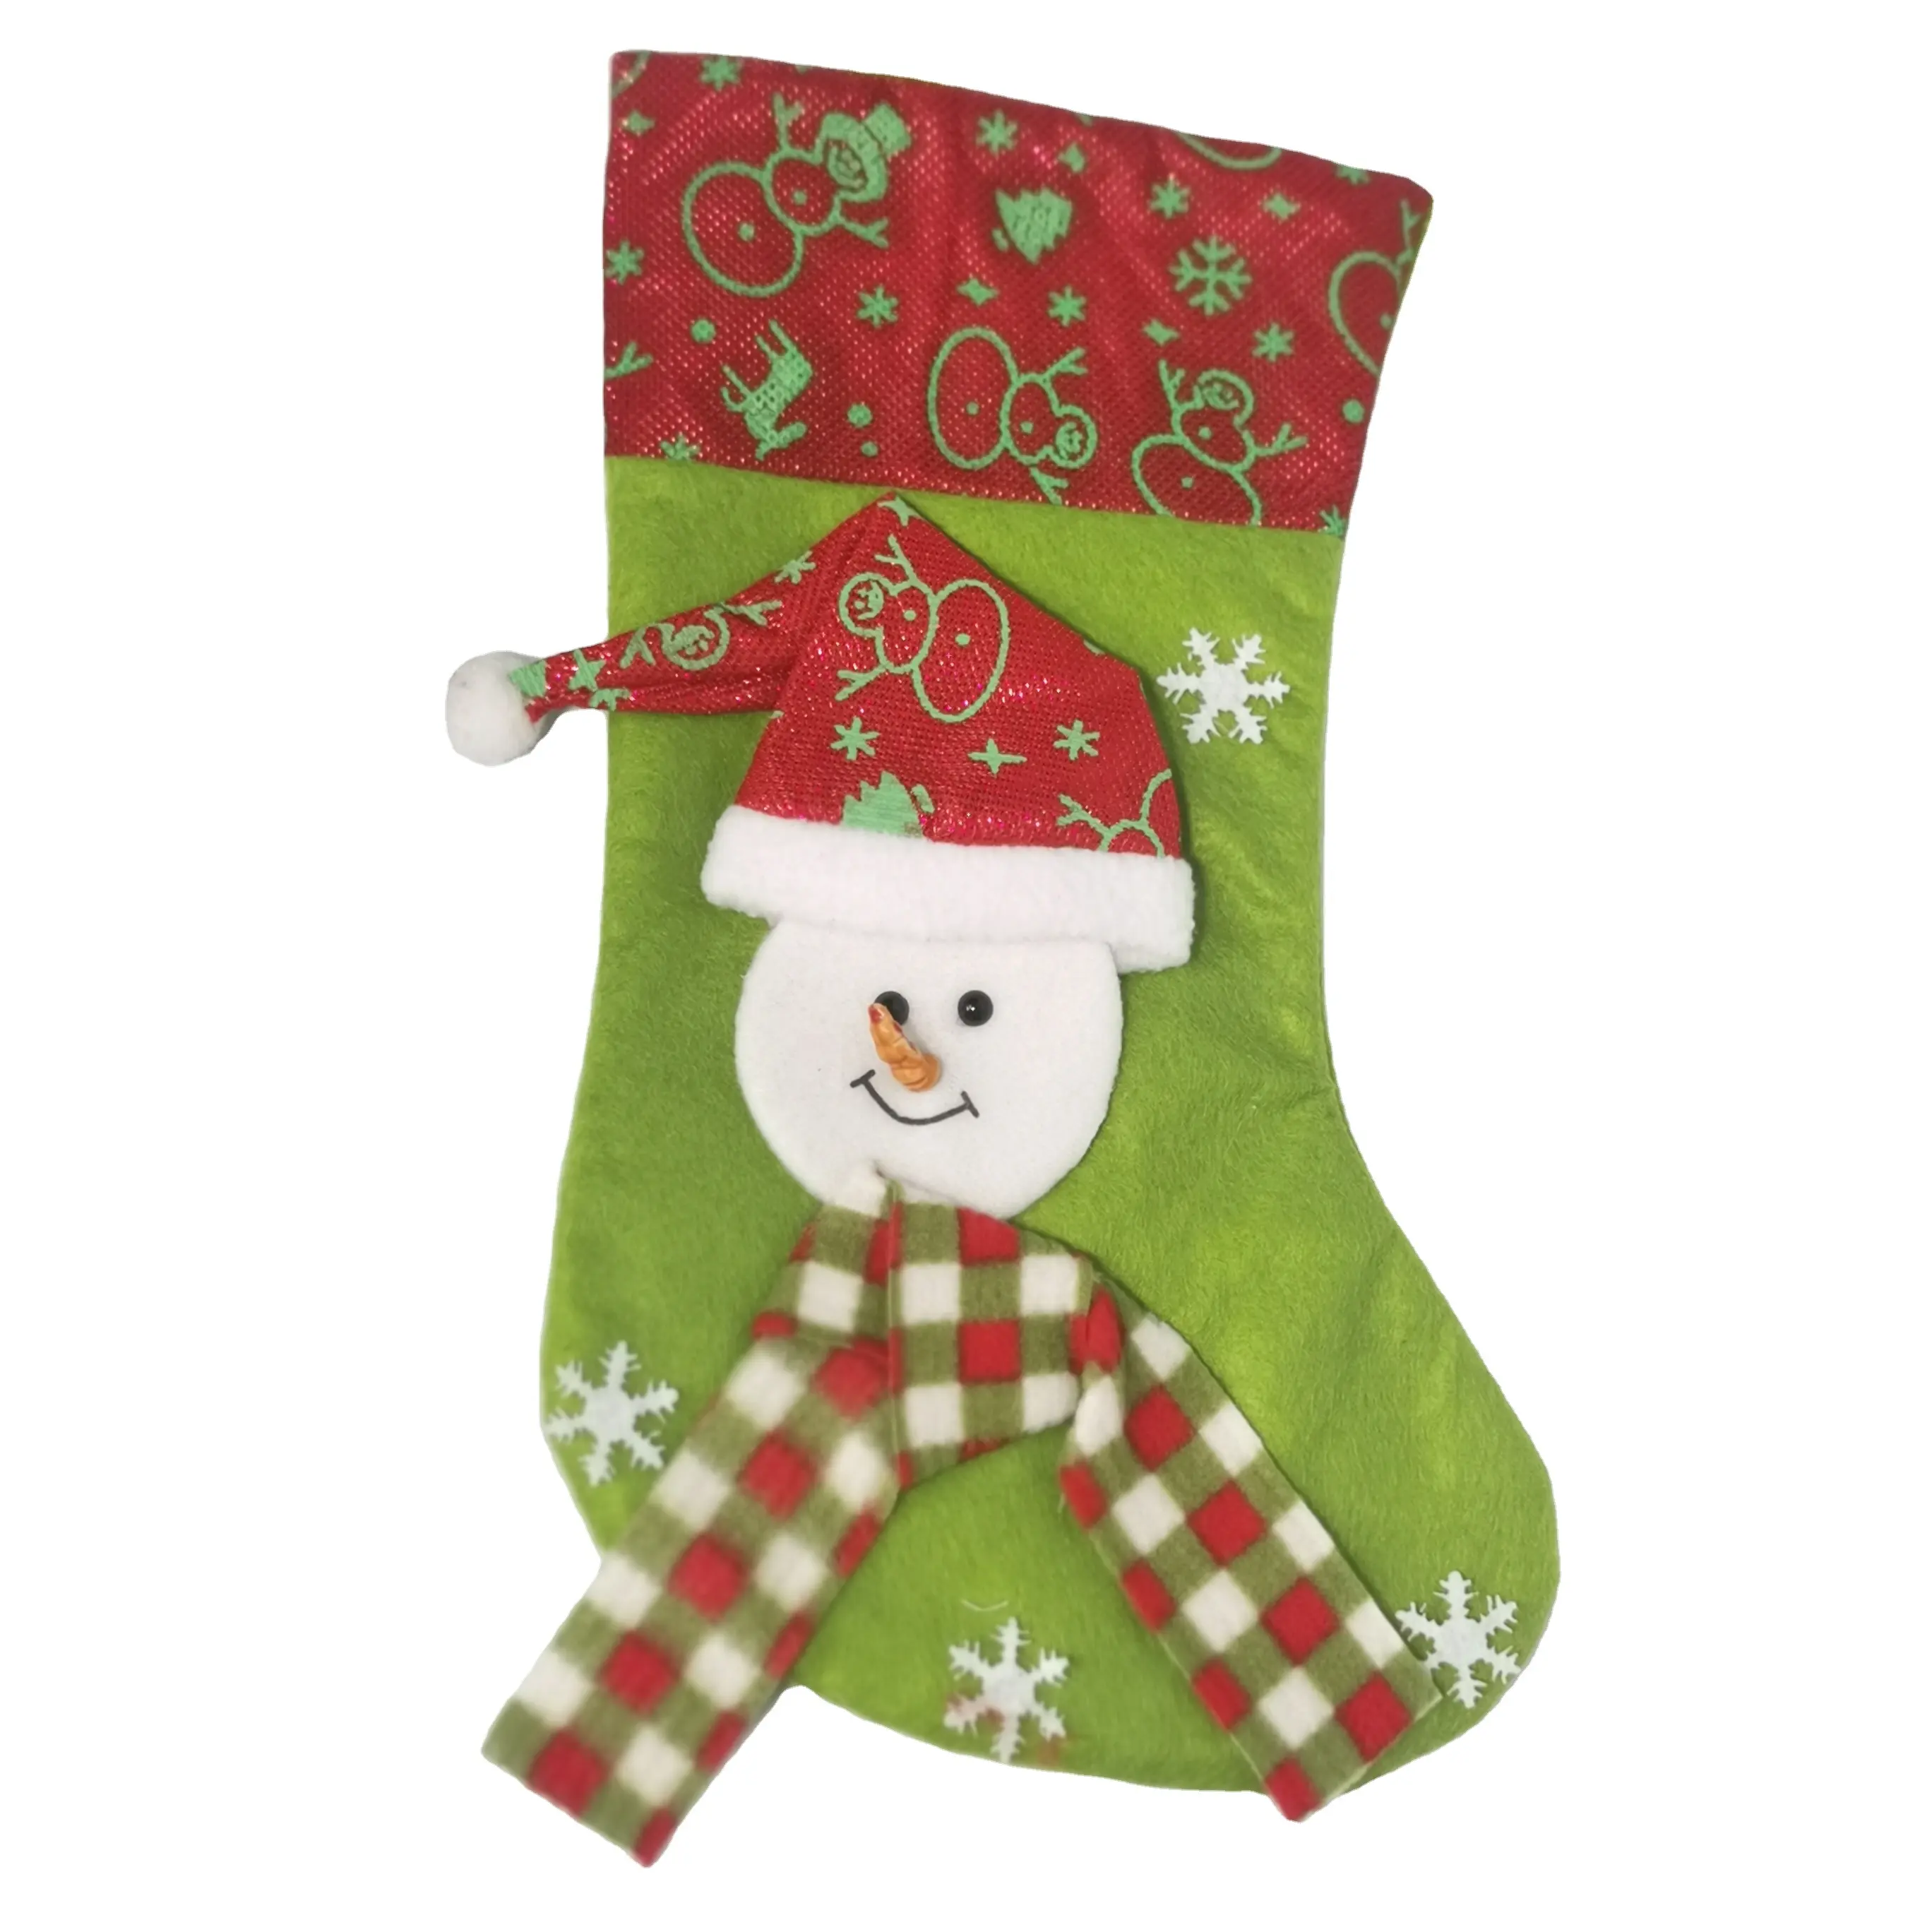 Green Nonwoven Snowman Christmas Stockings Mantle Hanging for Family Holiday Xmas Party Decorations Snowflake Tree Deer Design